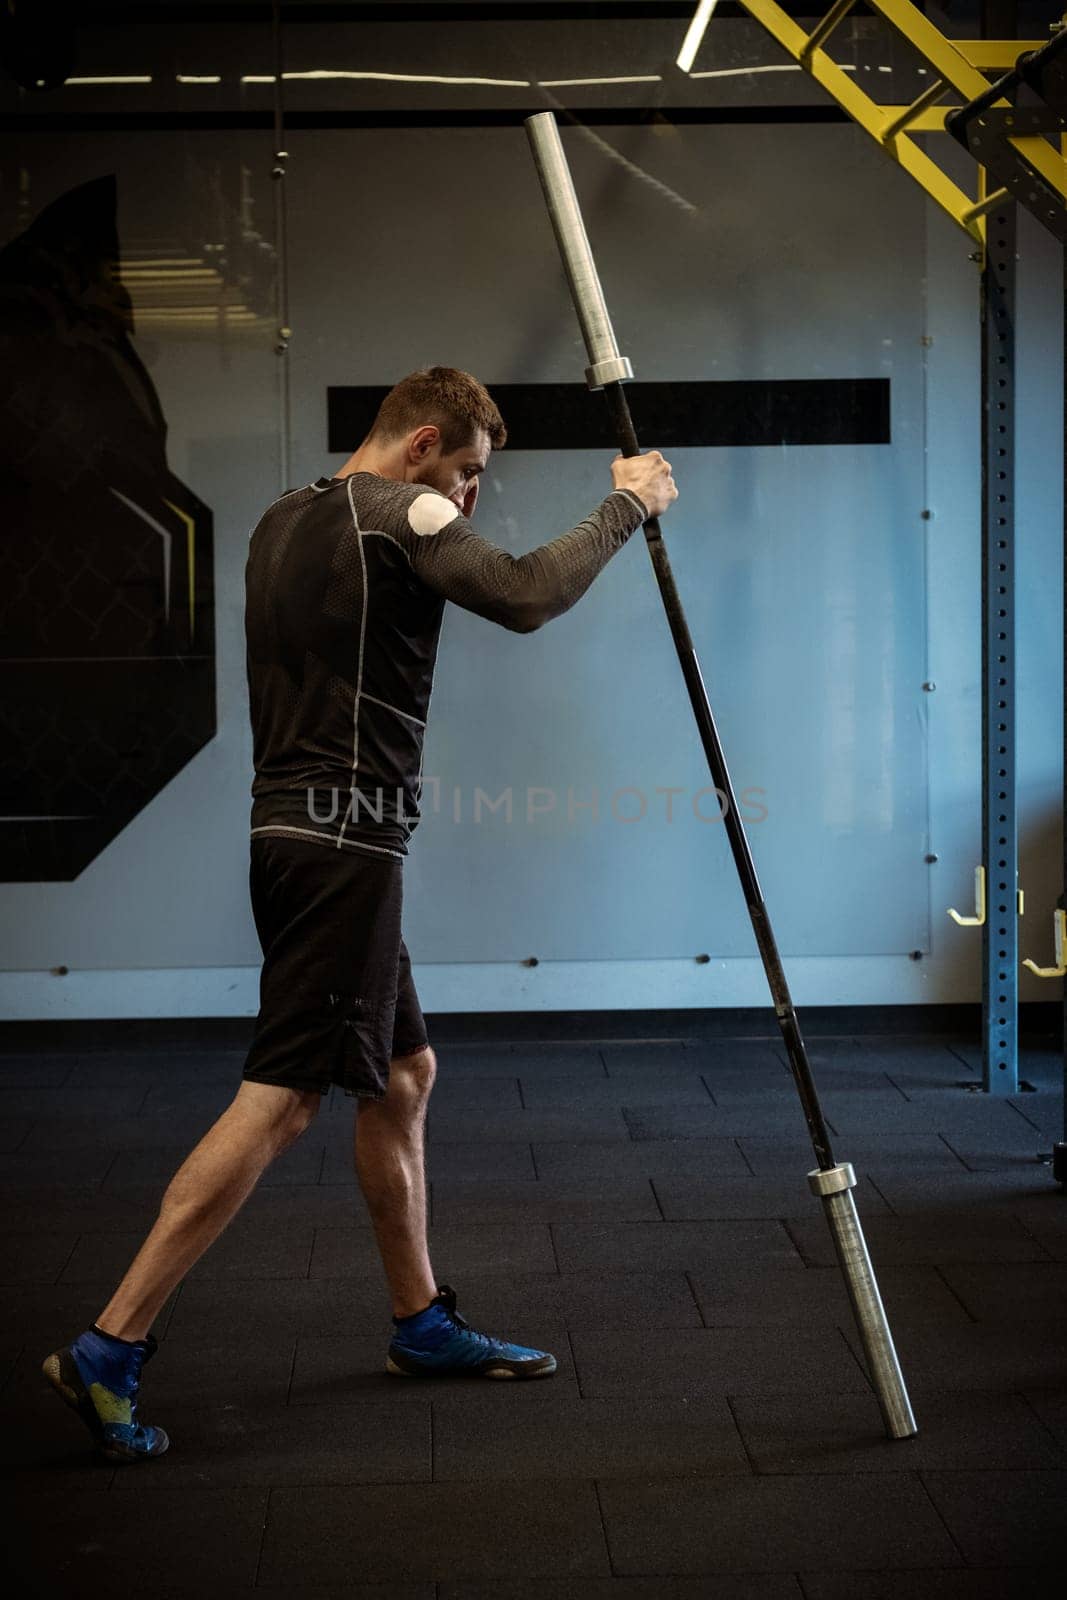 Concentrated young adult male boxer practicing barbell exercise designed to mimic boxing movements, targeting muscle groups used in punches for explosive strength during workout at gym